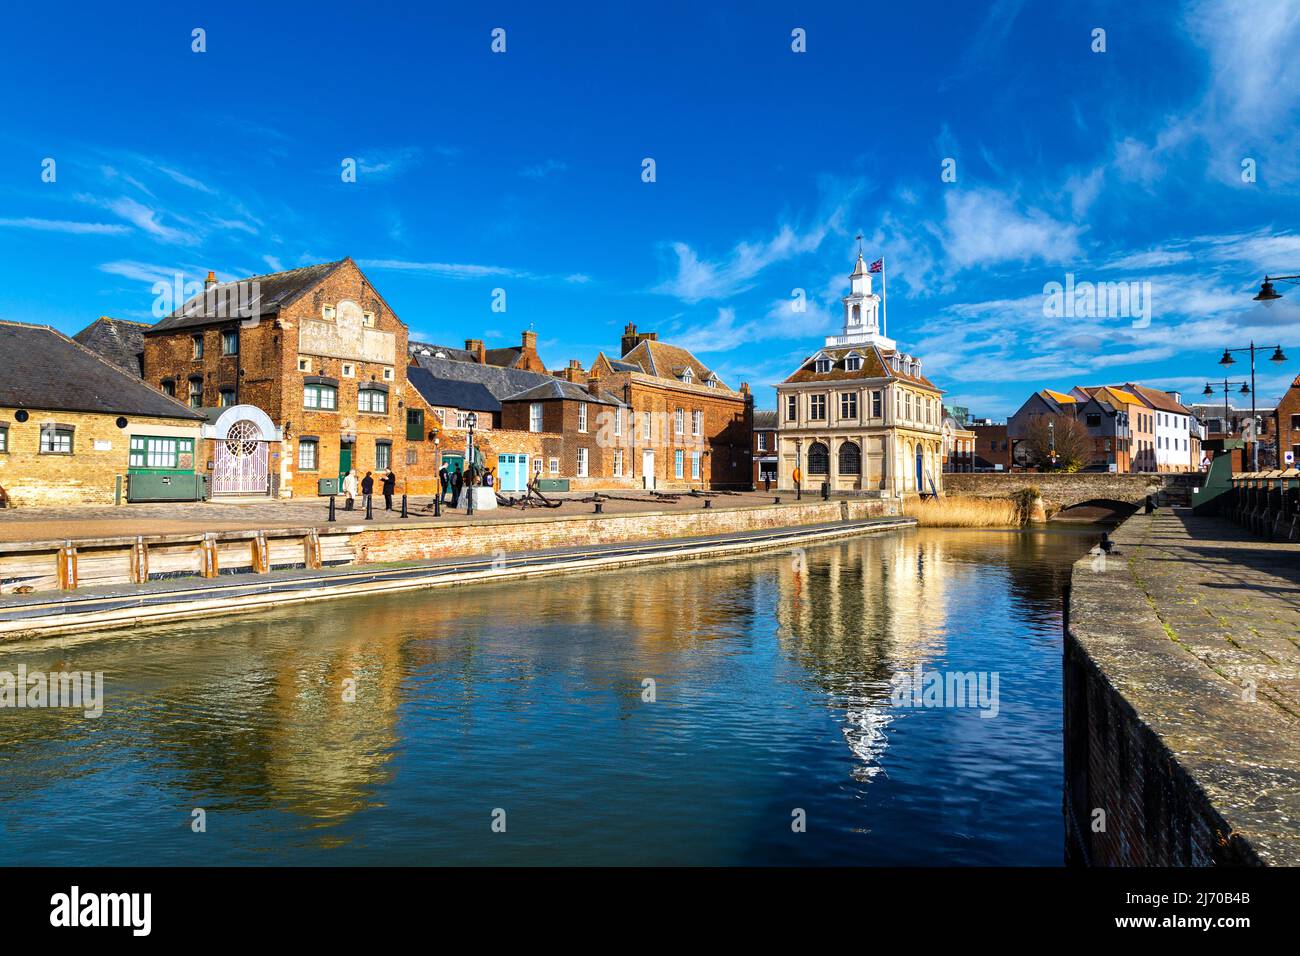 Purfleet quay riverside with view of 17th century Customs House in King's Lynn, Norfolk, UK Stock Photo